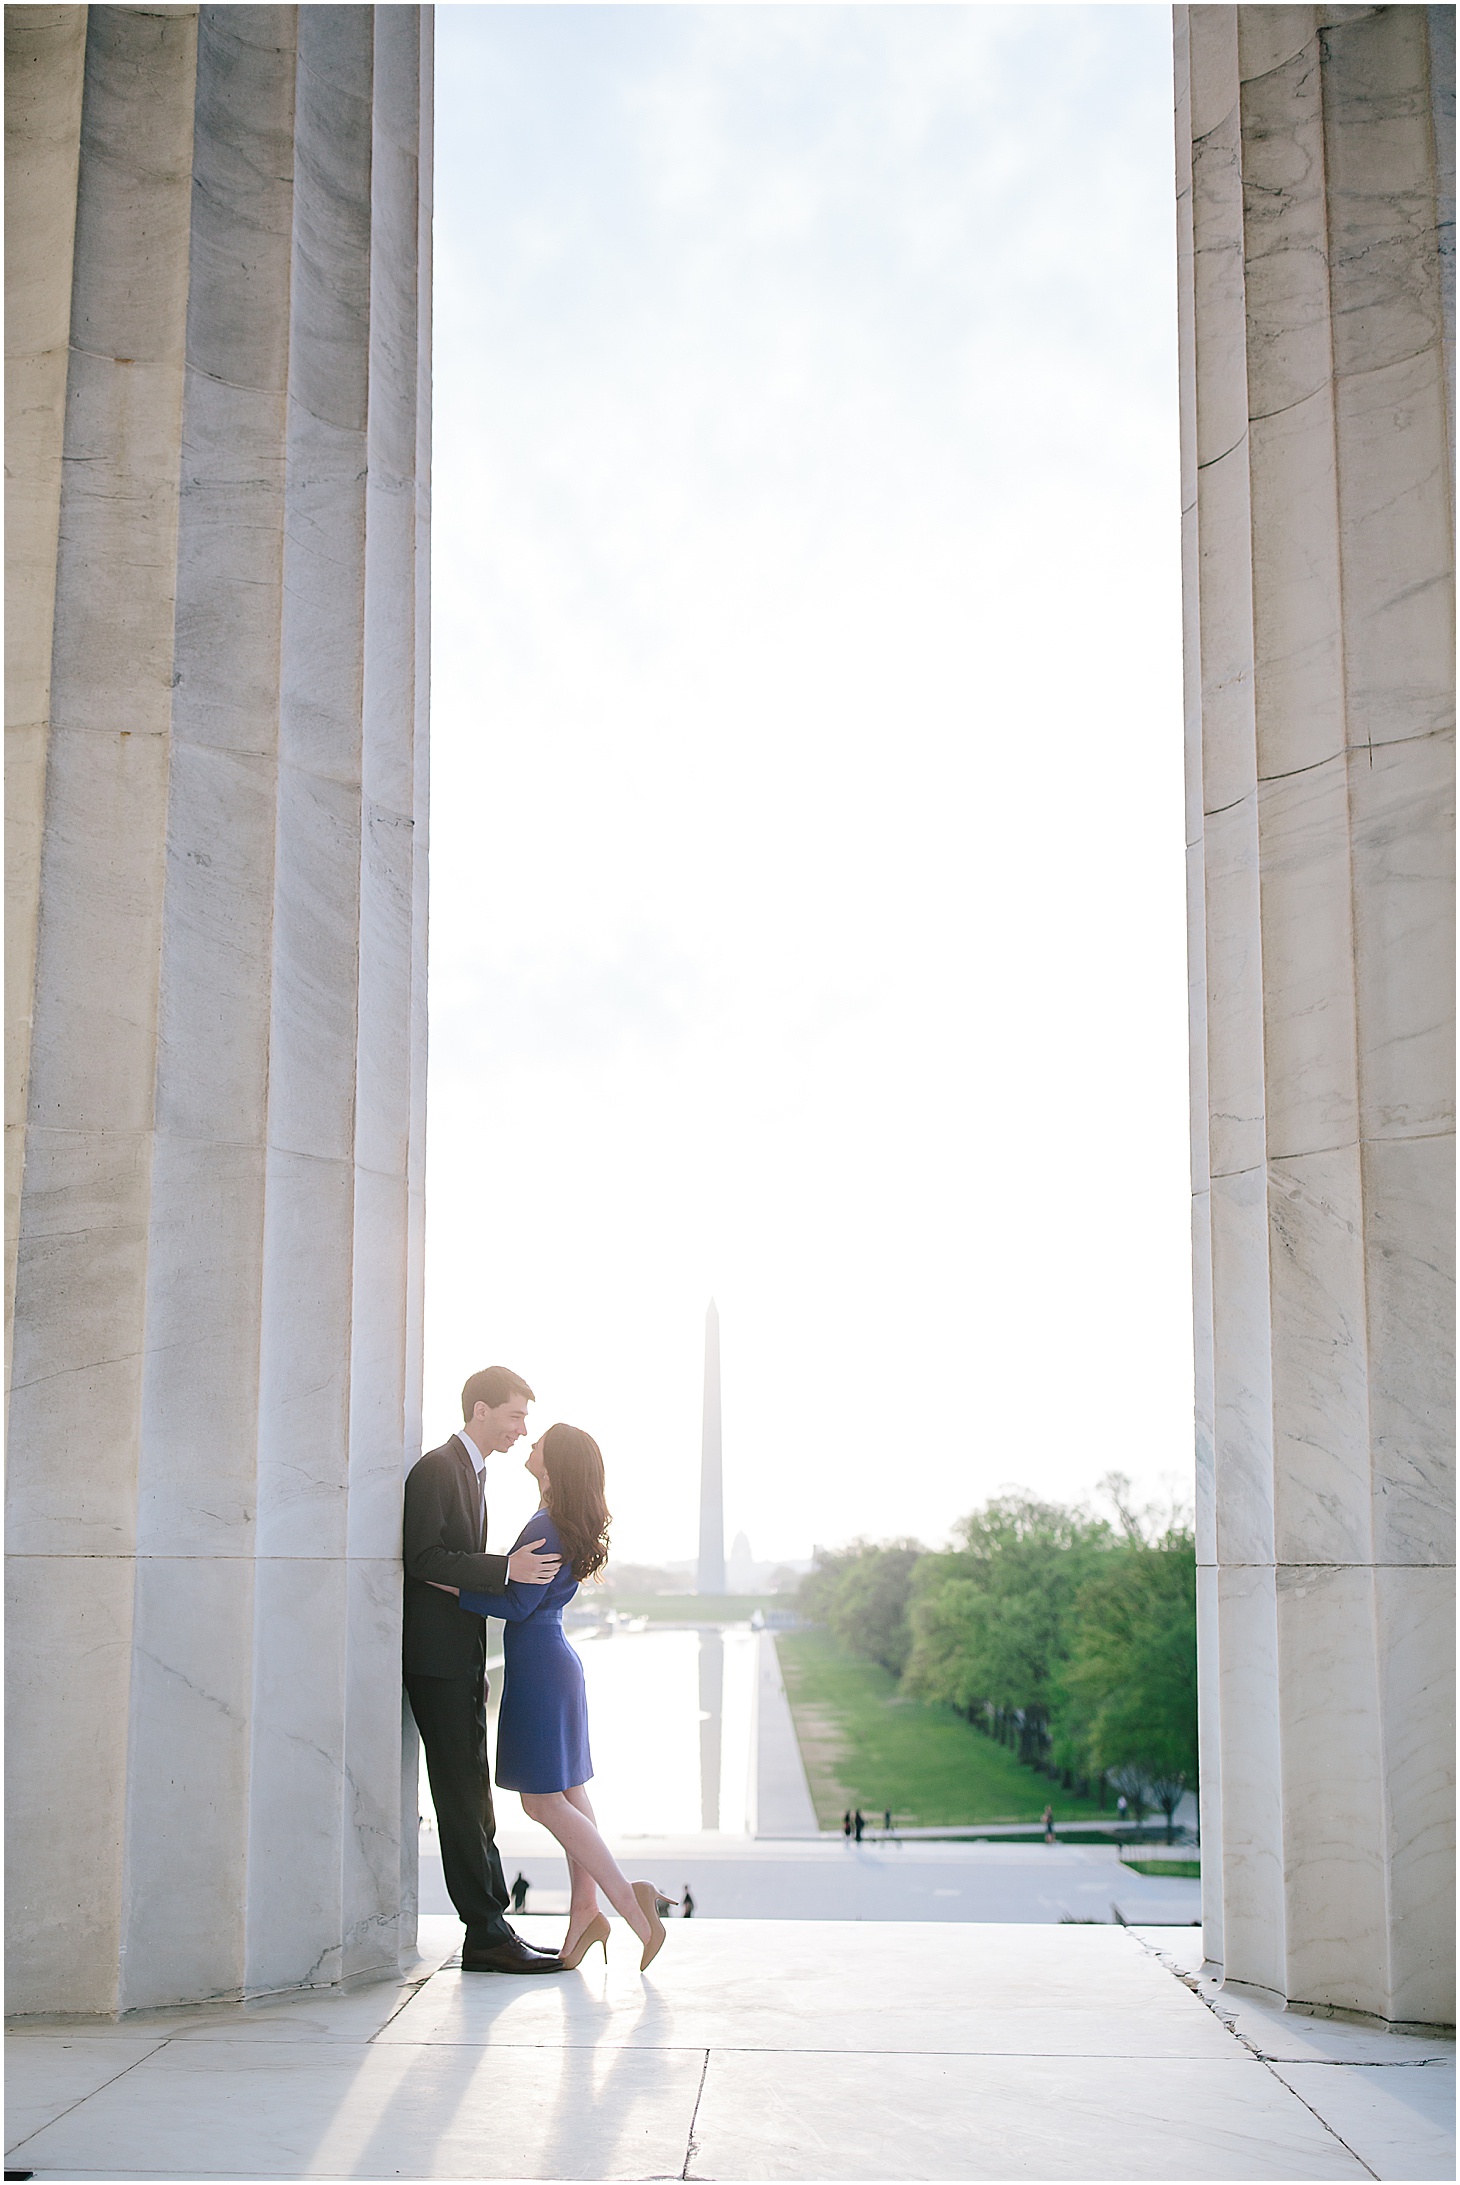 Engagement Portraits at Lincoln Memorial in DC, Spring Blooms Engagement Session at the United States Supreme Court, Sarah Bradshaw Photography, DC Engagement Photographer